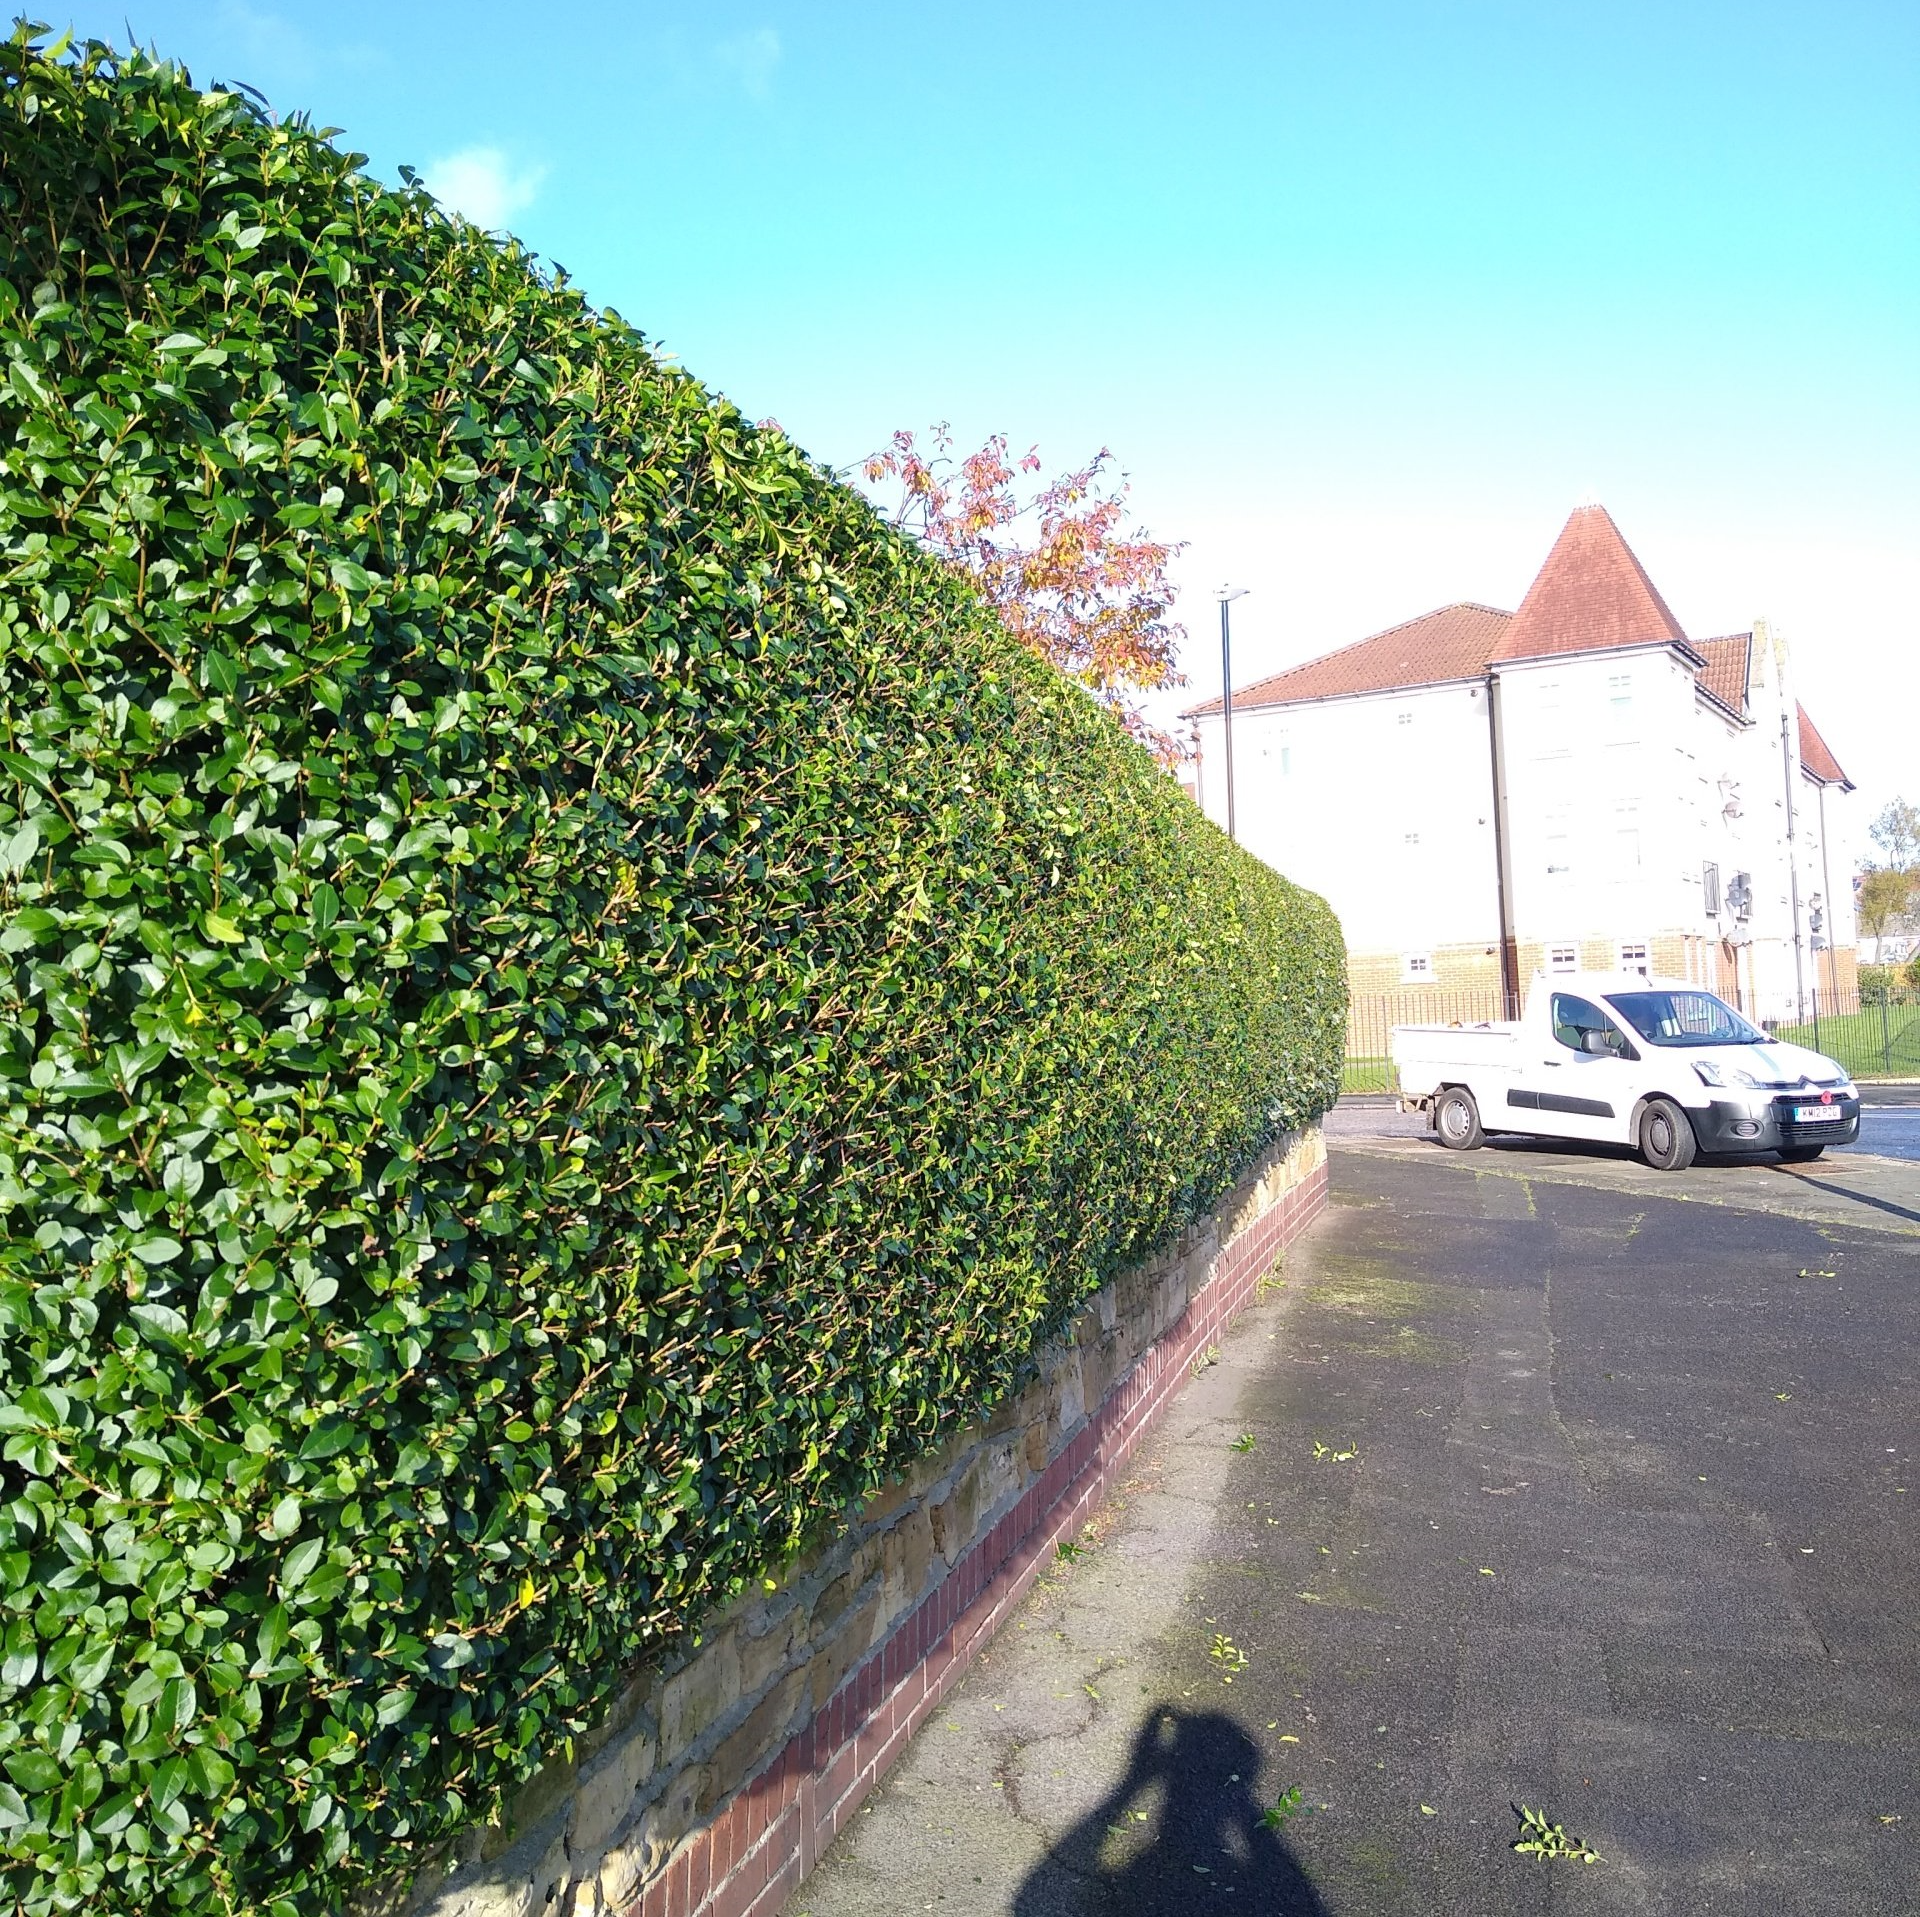 Our hedge trimming services include trimming and maintenance